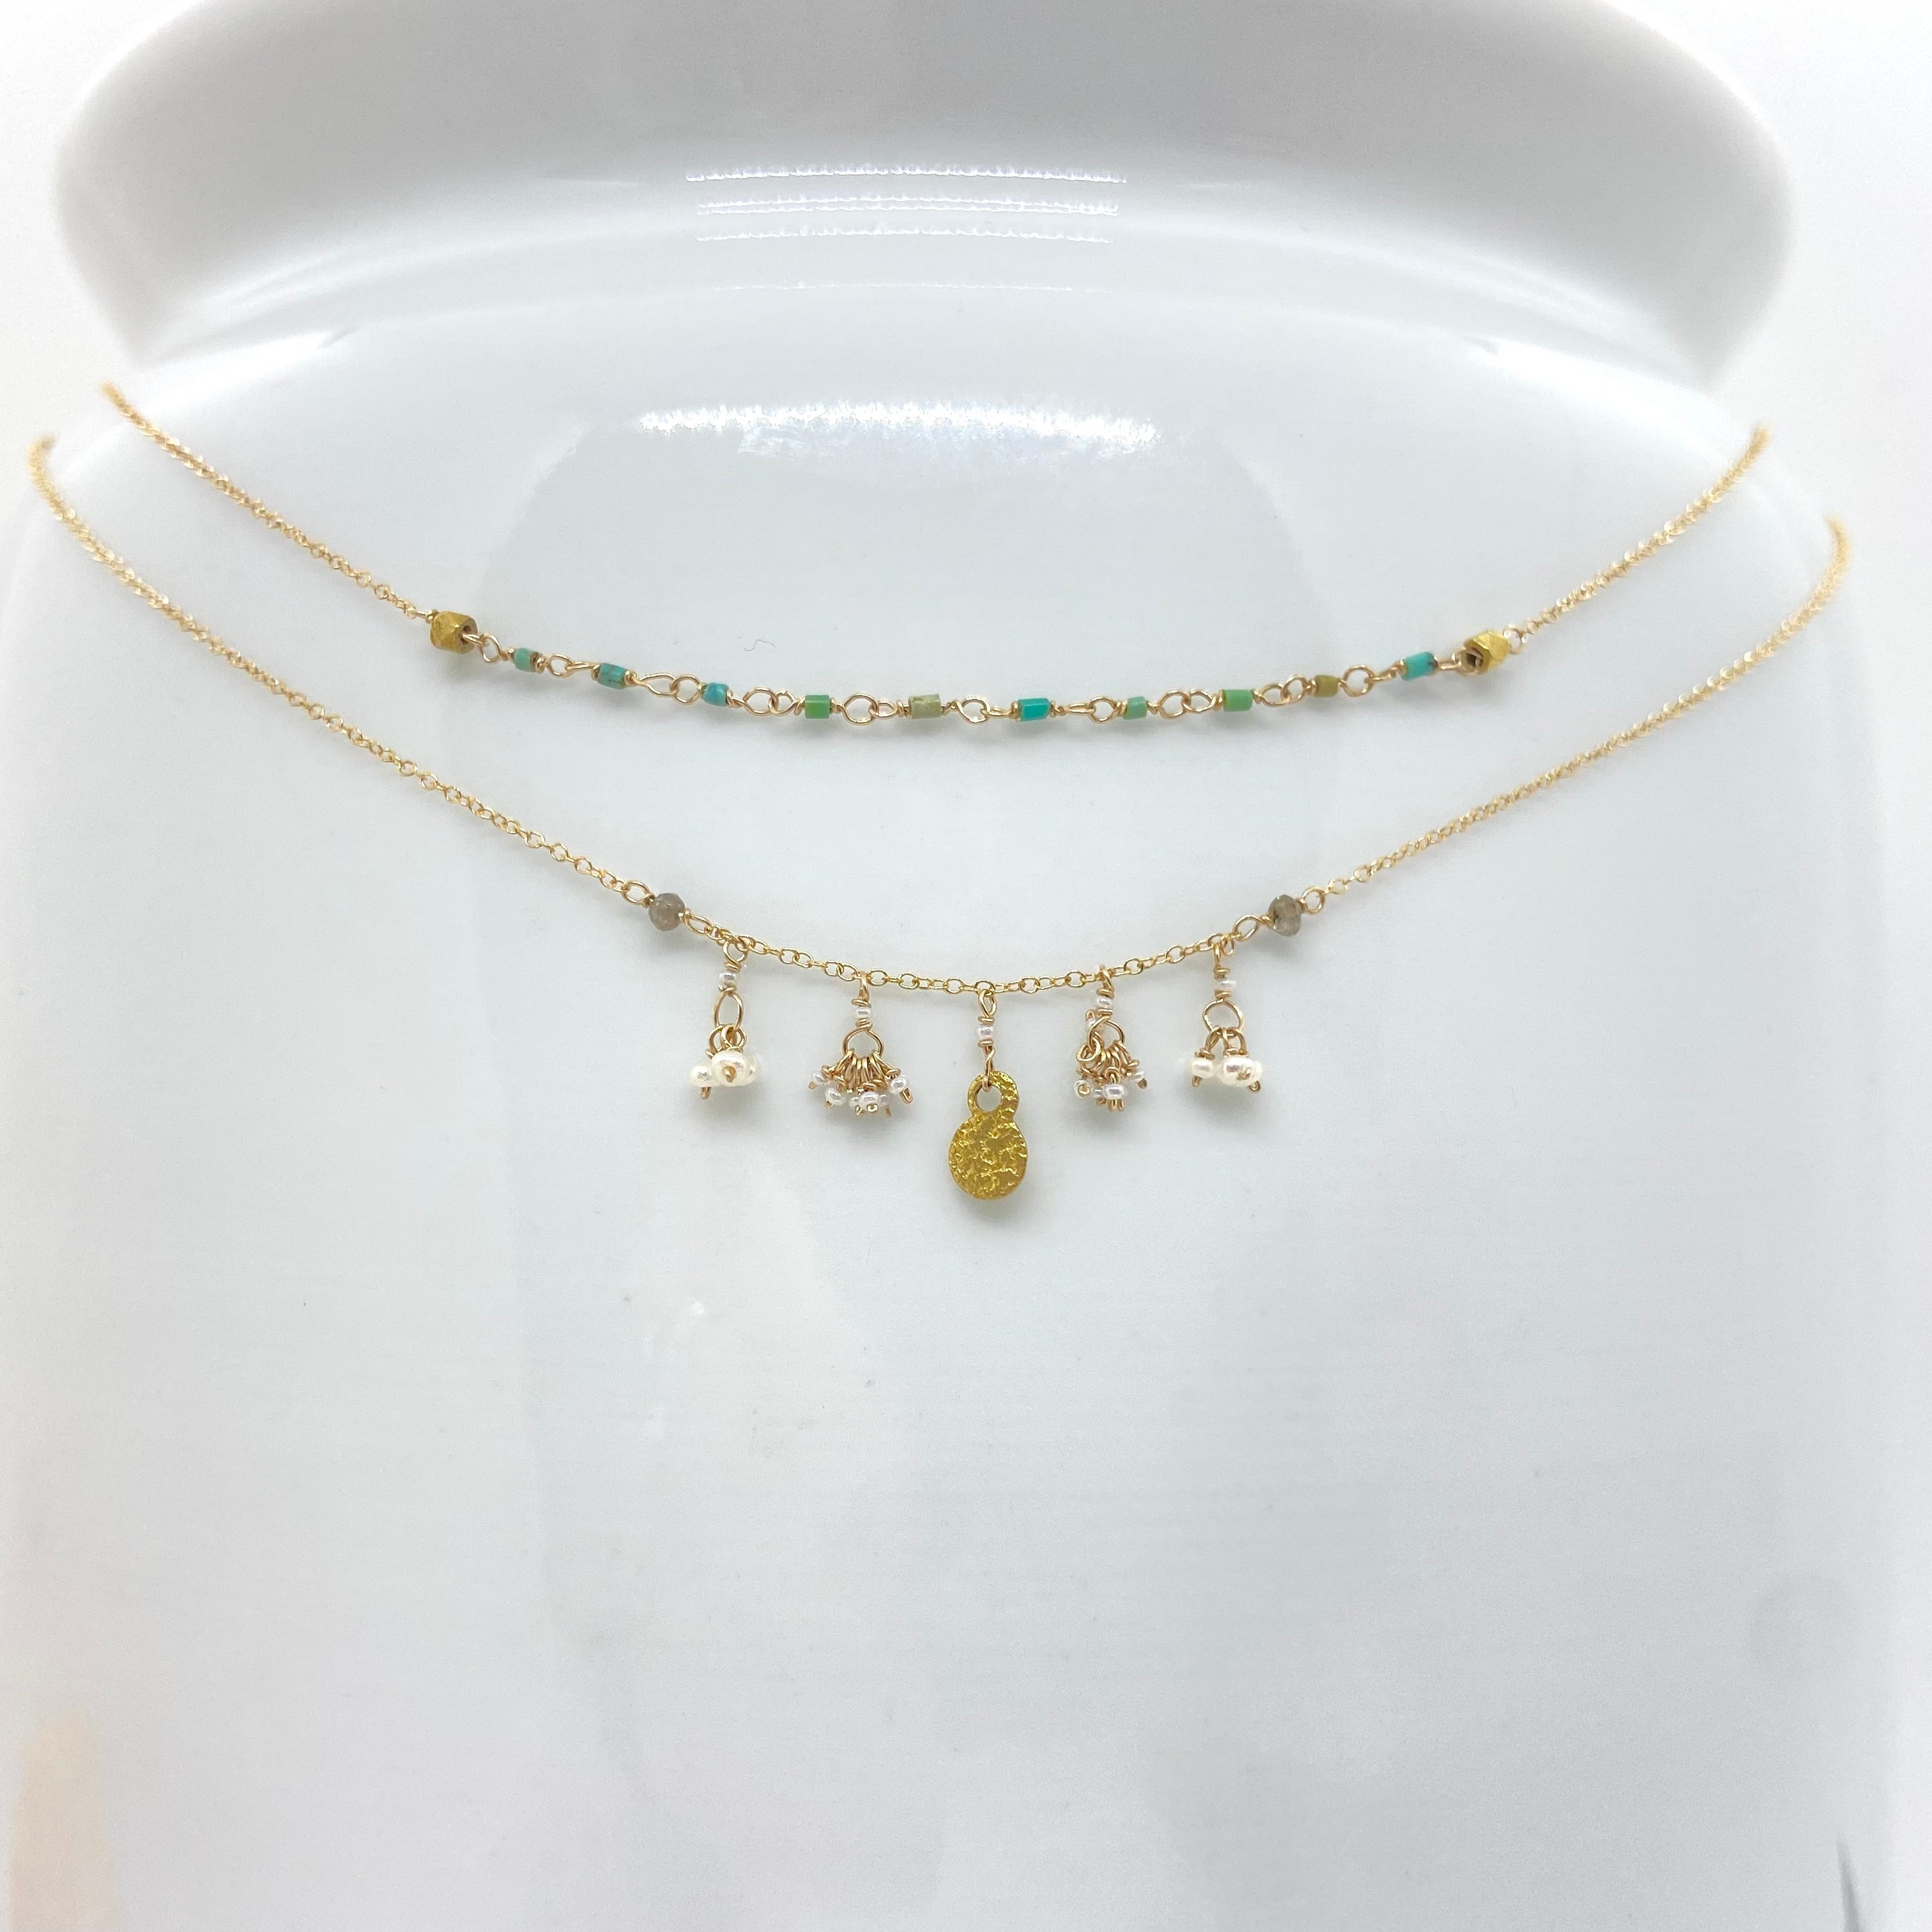 14k Gold Chain Necklace w/ 18k Gold Pendant, Freshwater Pearls, Diamonds & Antique Italian Beads